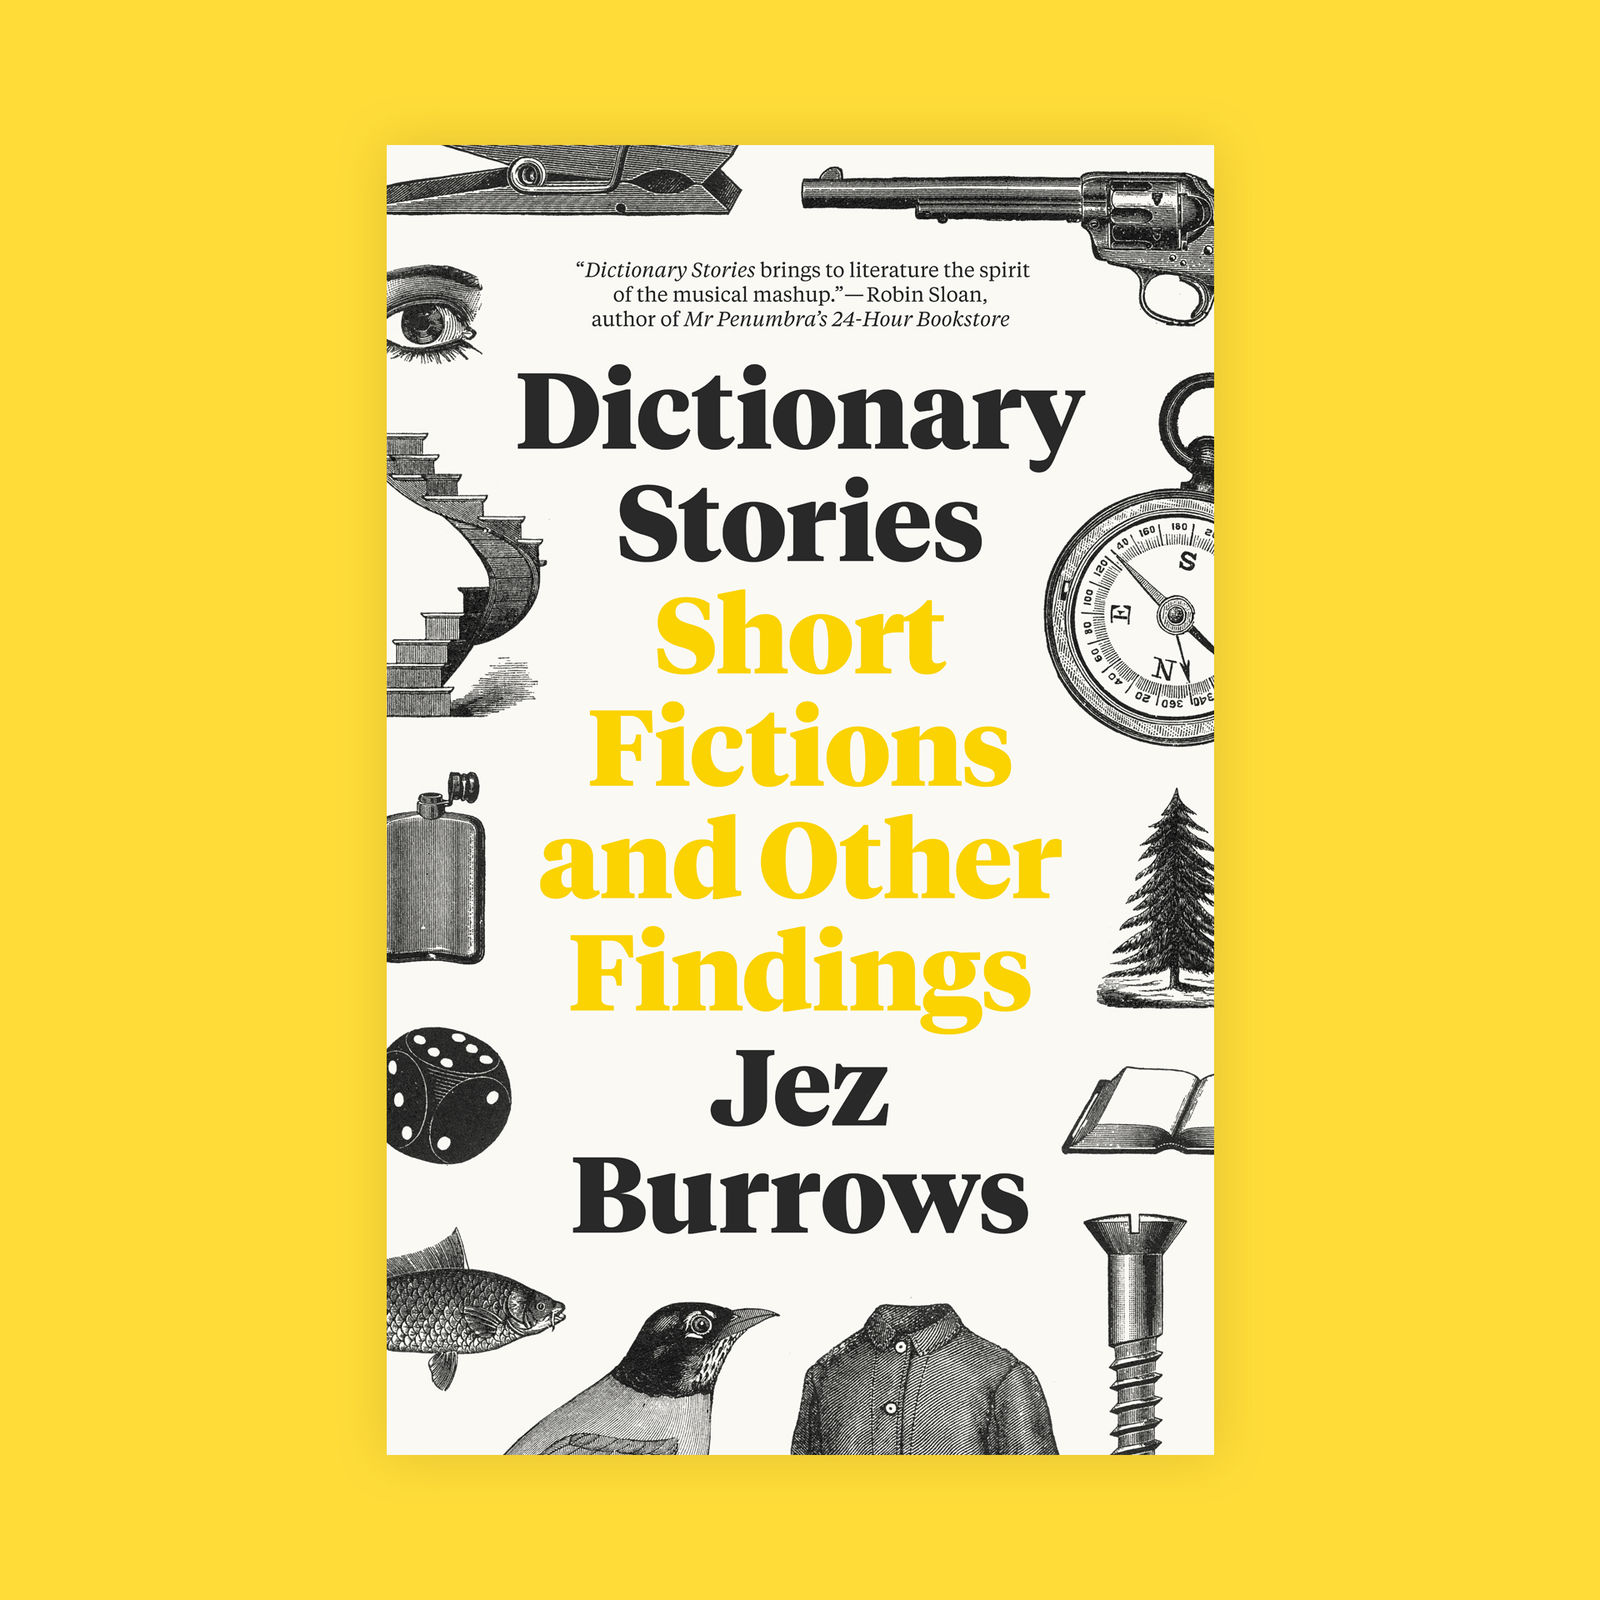 Introducing: Dictionary Stories